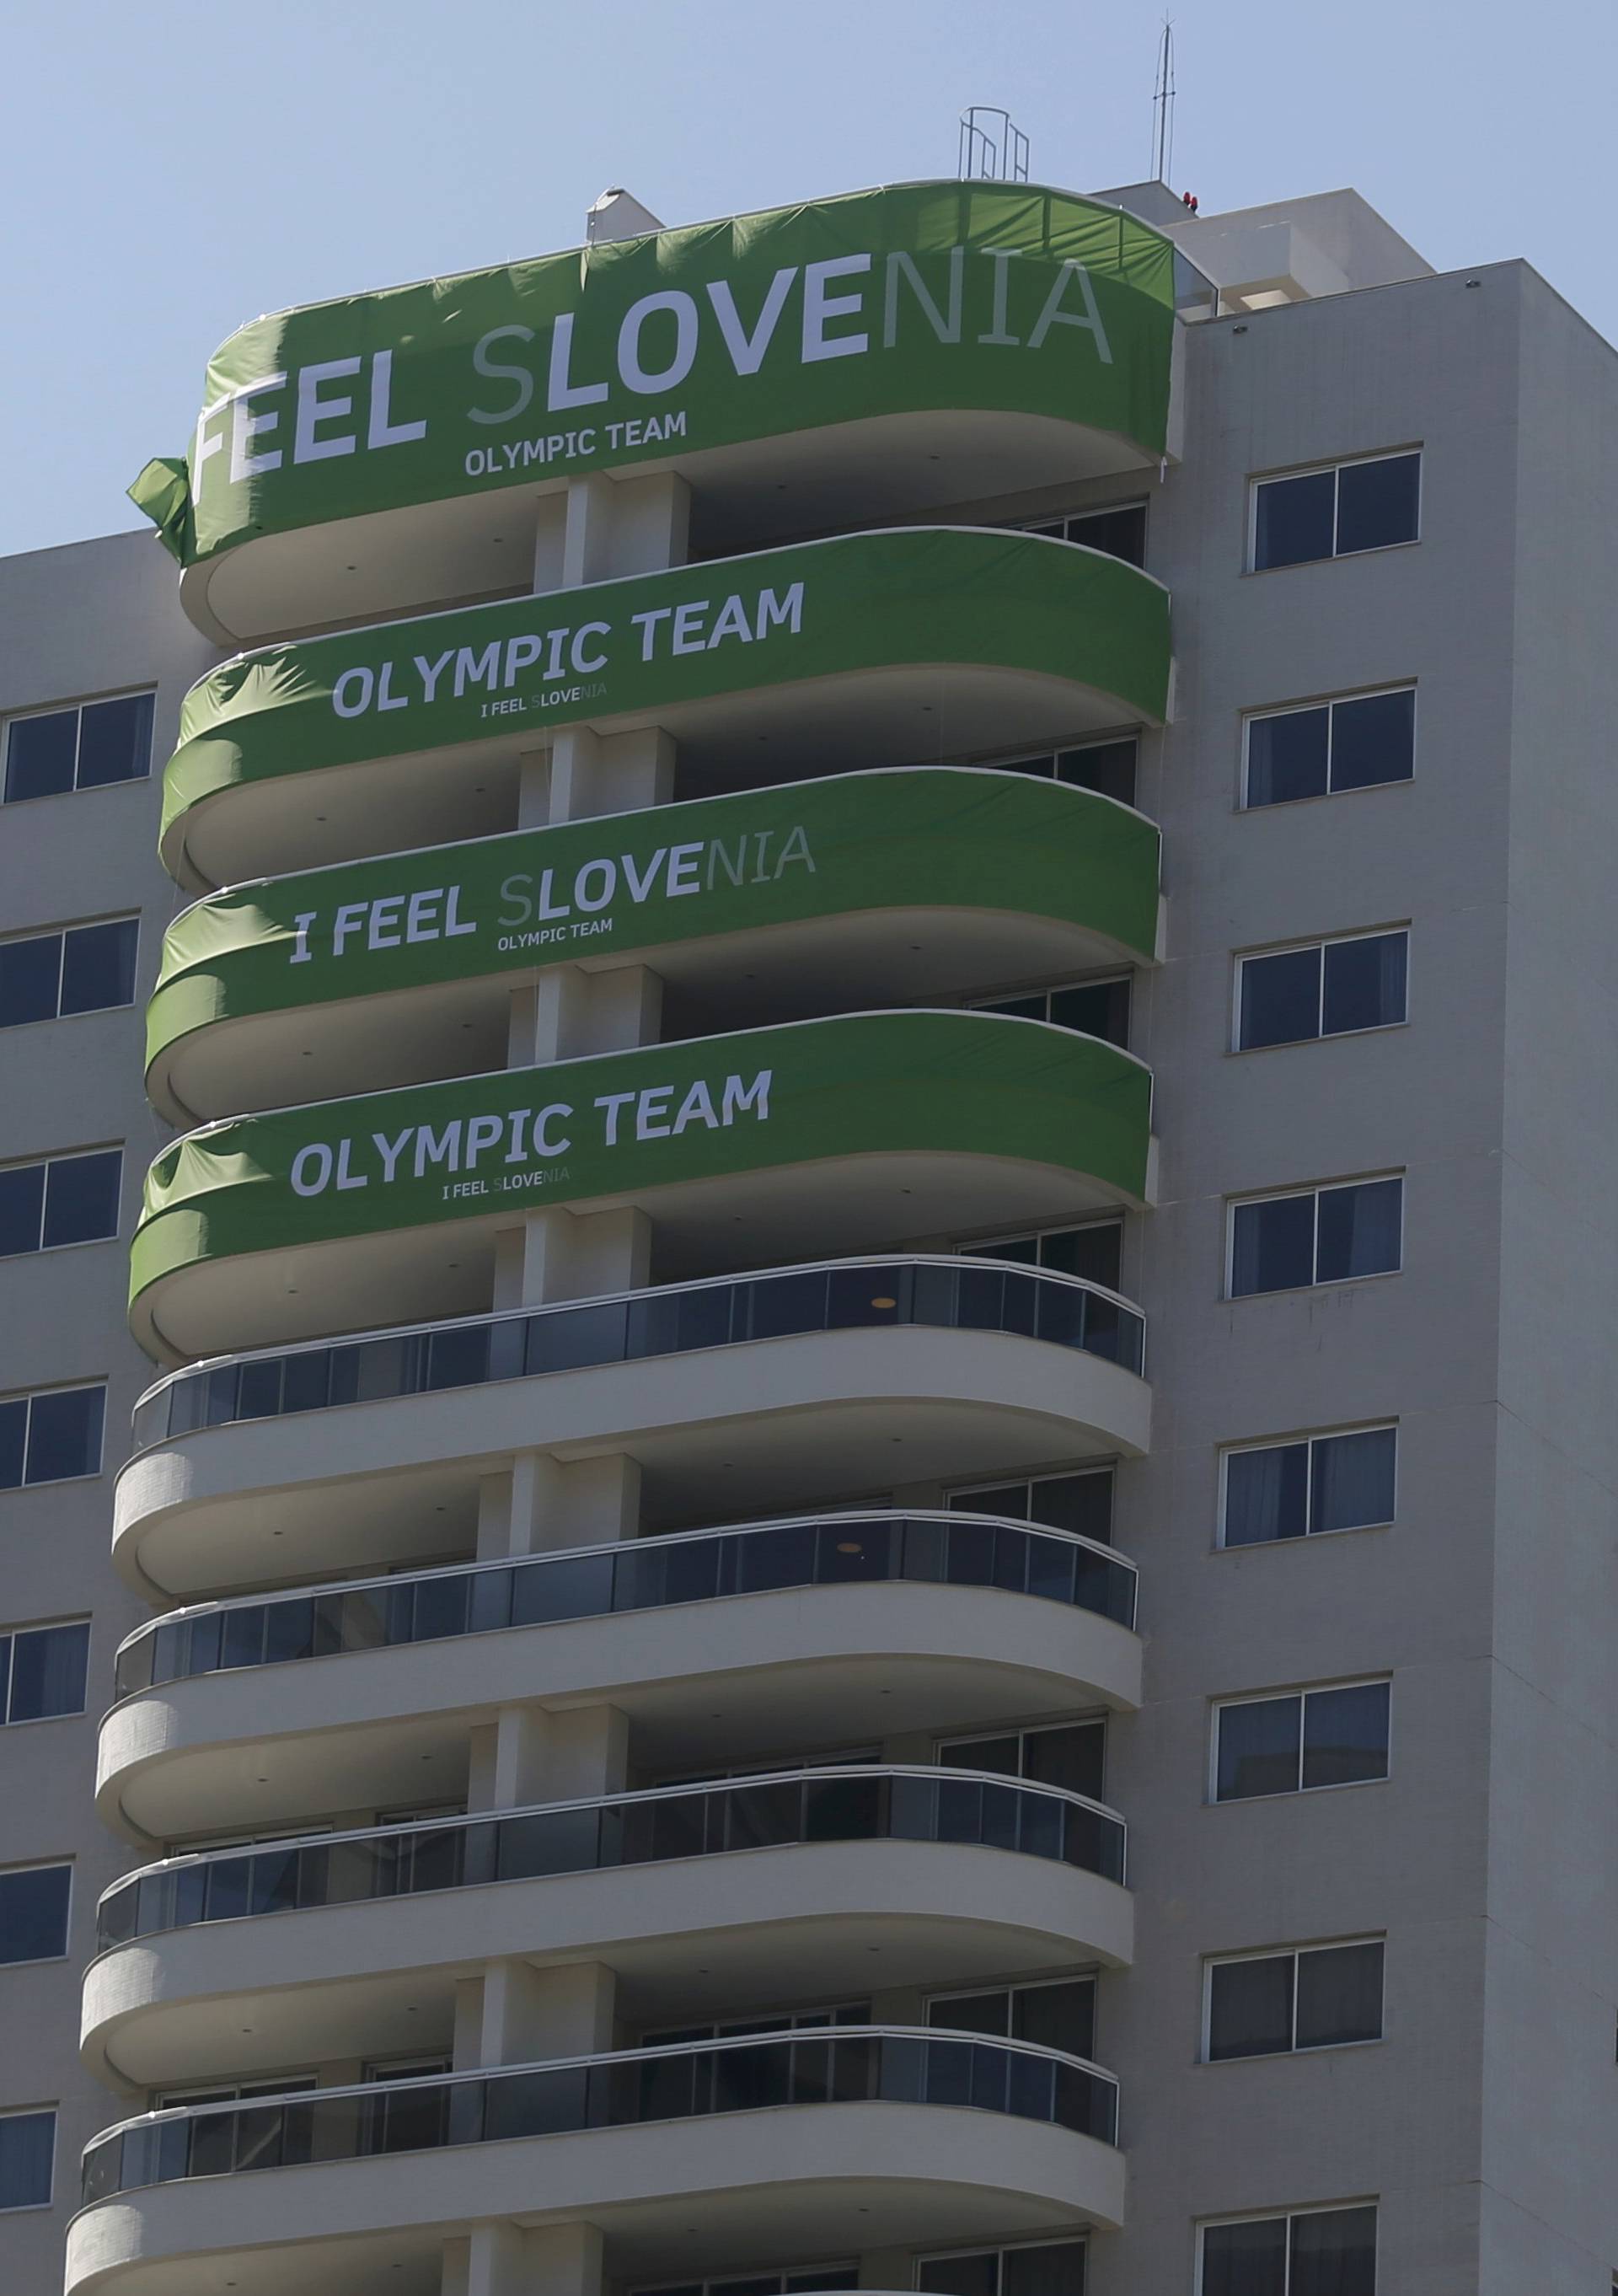 A view of one of the blocks of apartments where Slovenial's athletes are supposed to stay in Rio de Janeiro